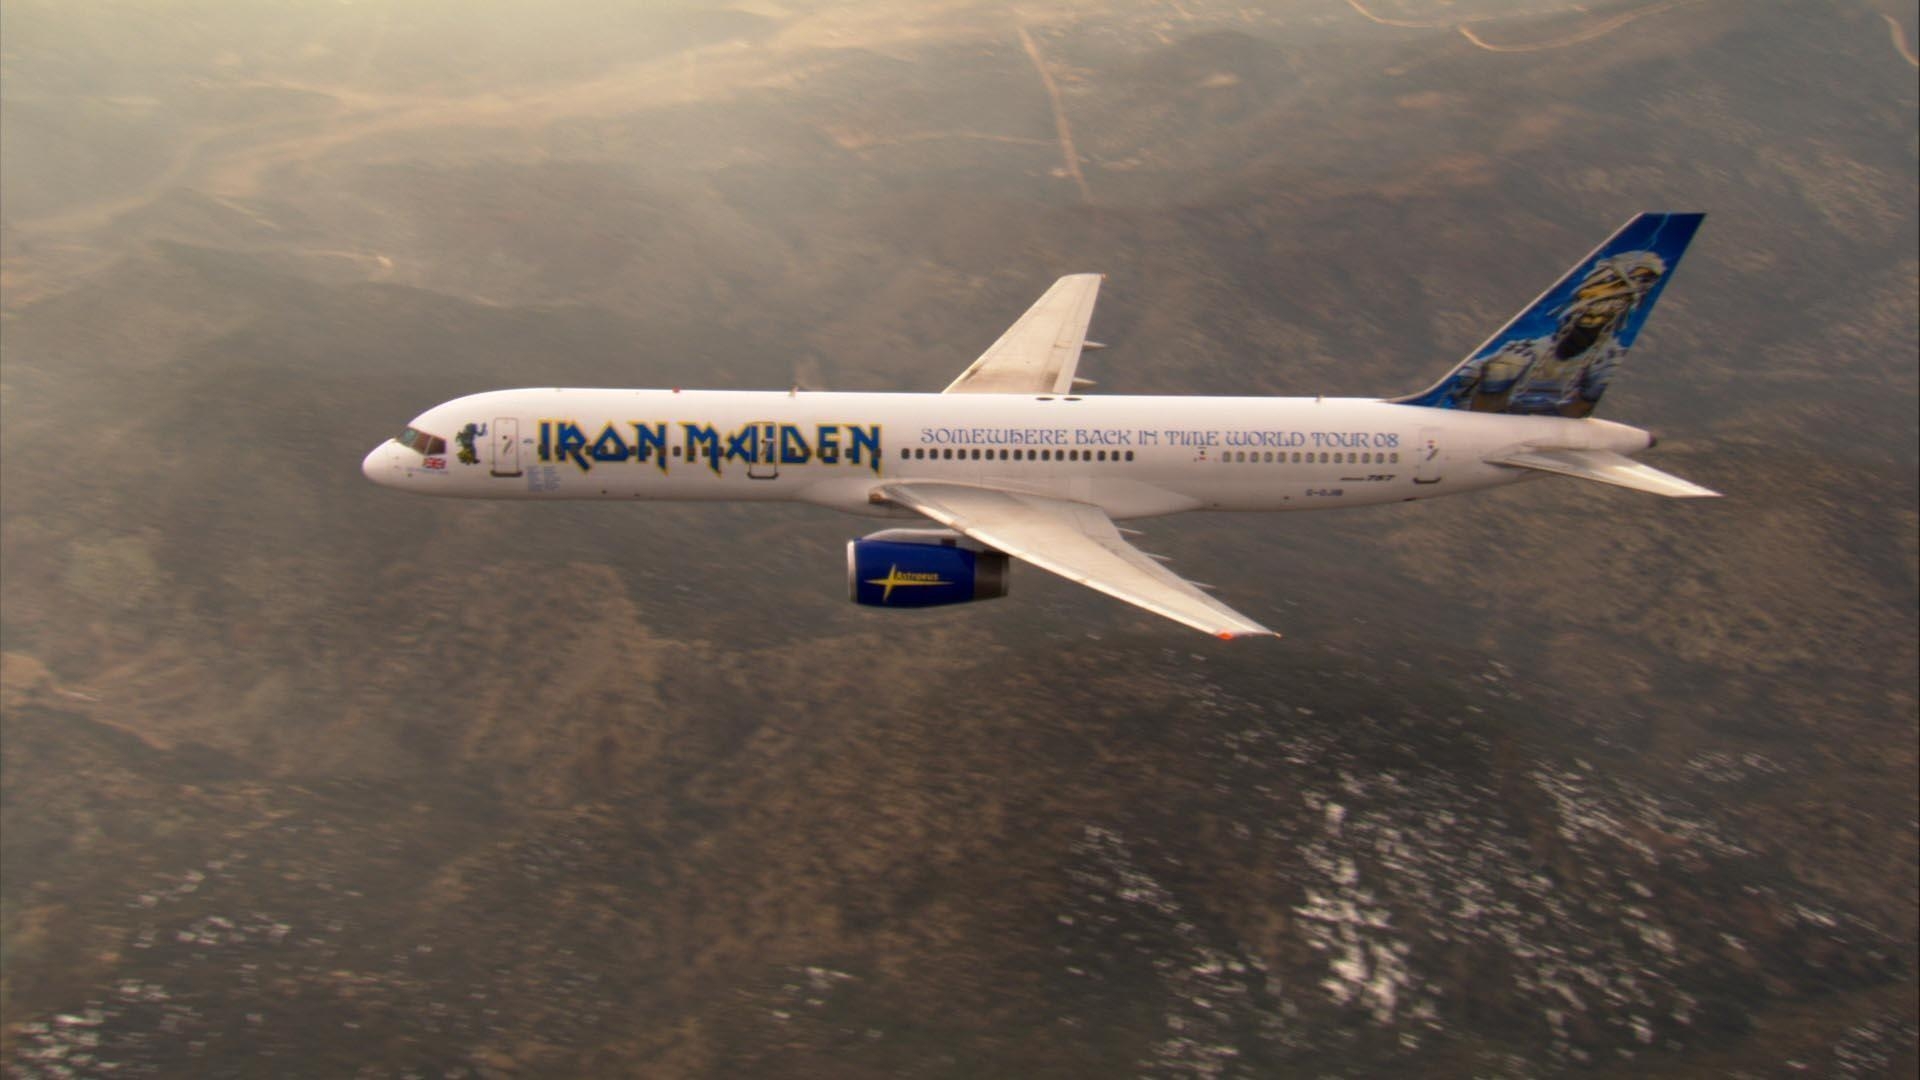 Wallpapers boeing iron maiden airplane on the desktop